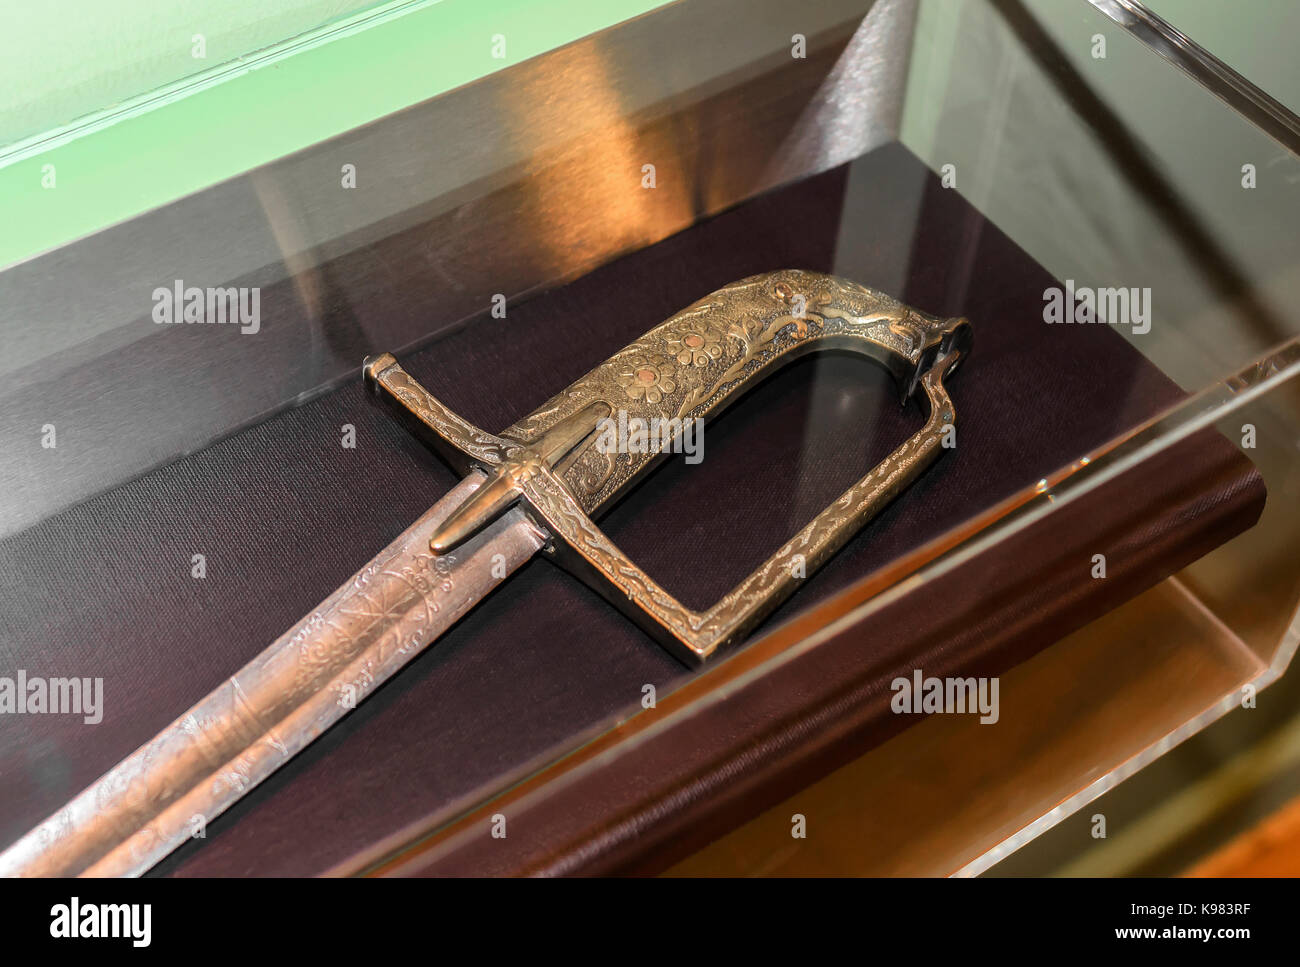 Handle of the old saber. Stock Photo